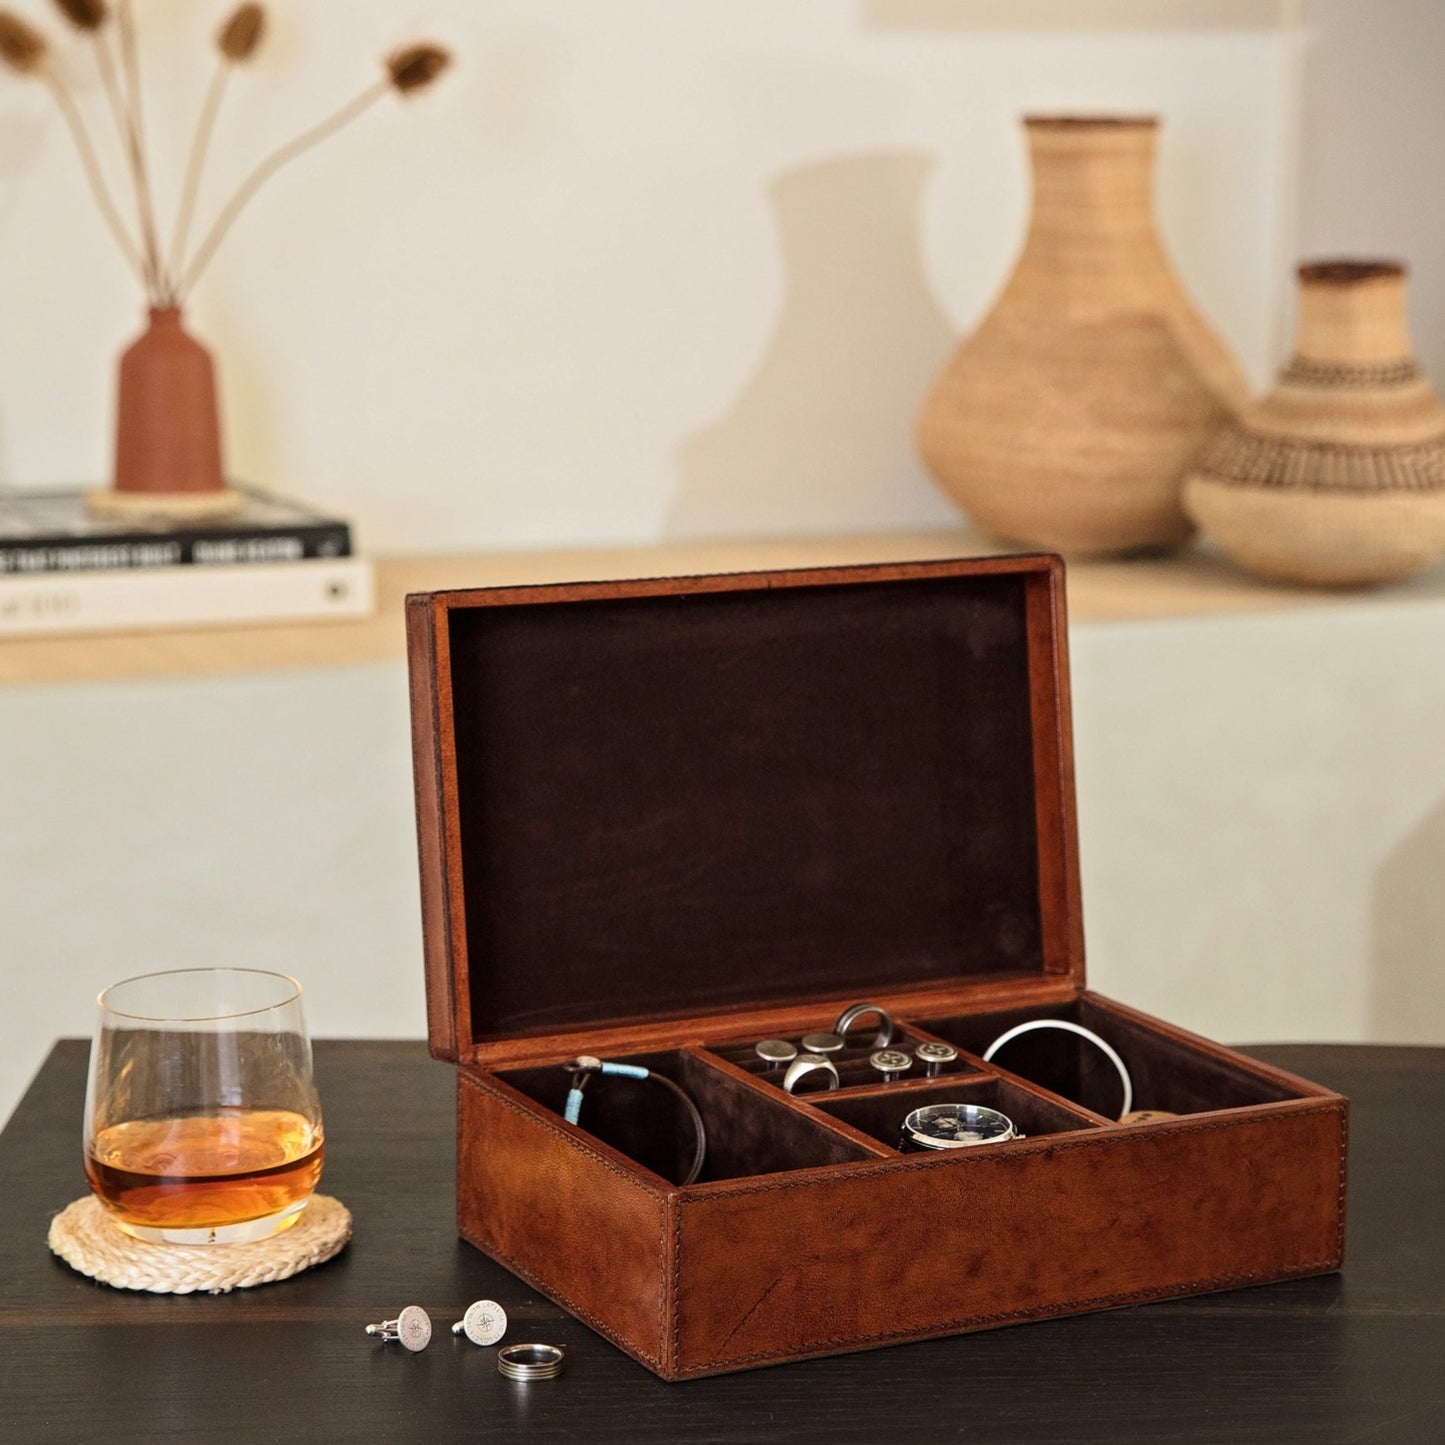 
                  
                    Rectangular men’s jewellery box in tan leather, with ring cushion, watch pillow and lined with micro suede. Personalise with a name or date as a keepsake 21st birthday gift for him.
                  
                